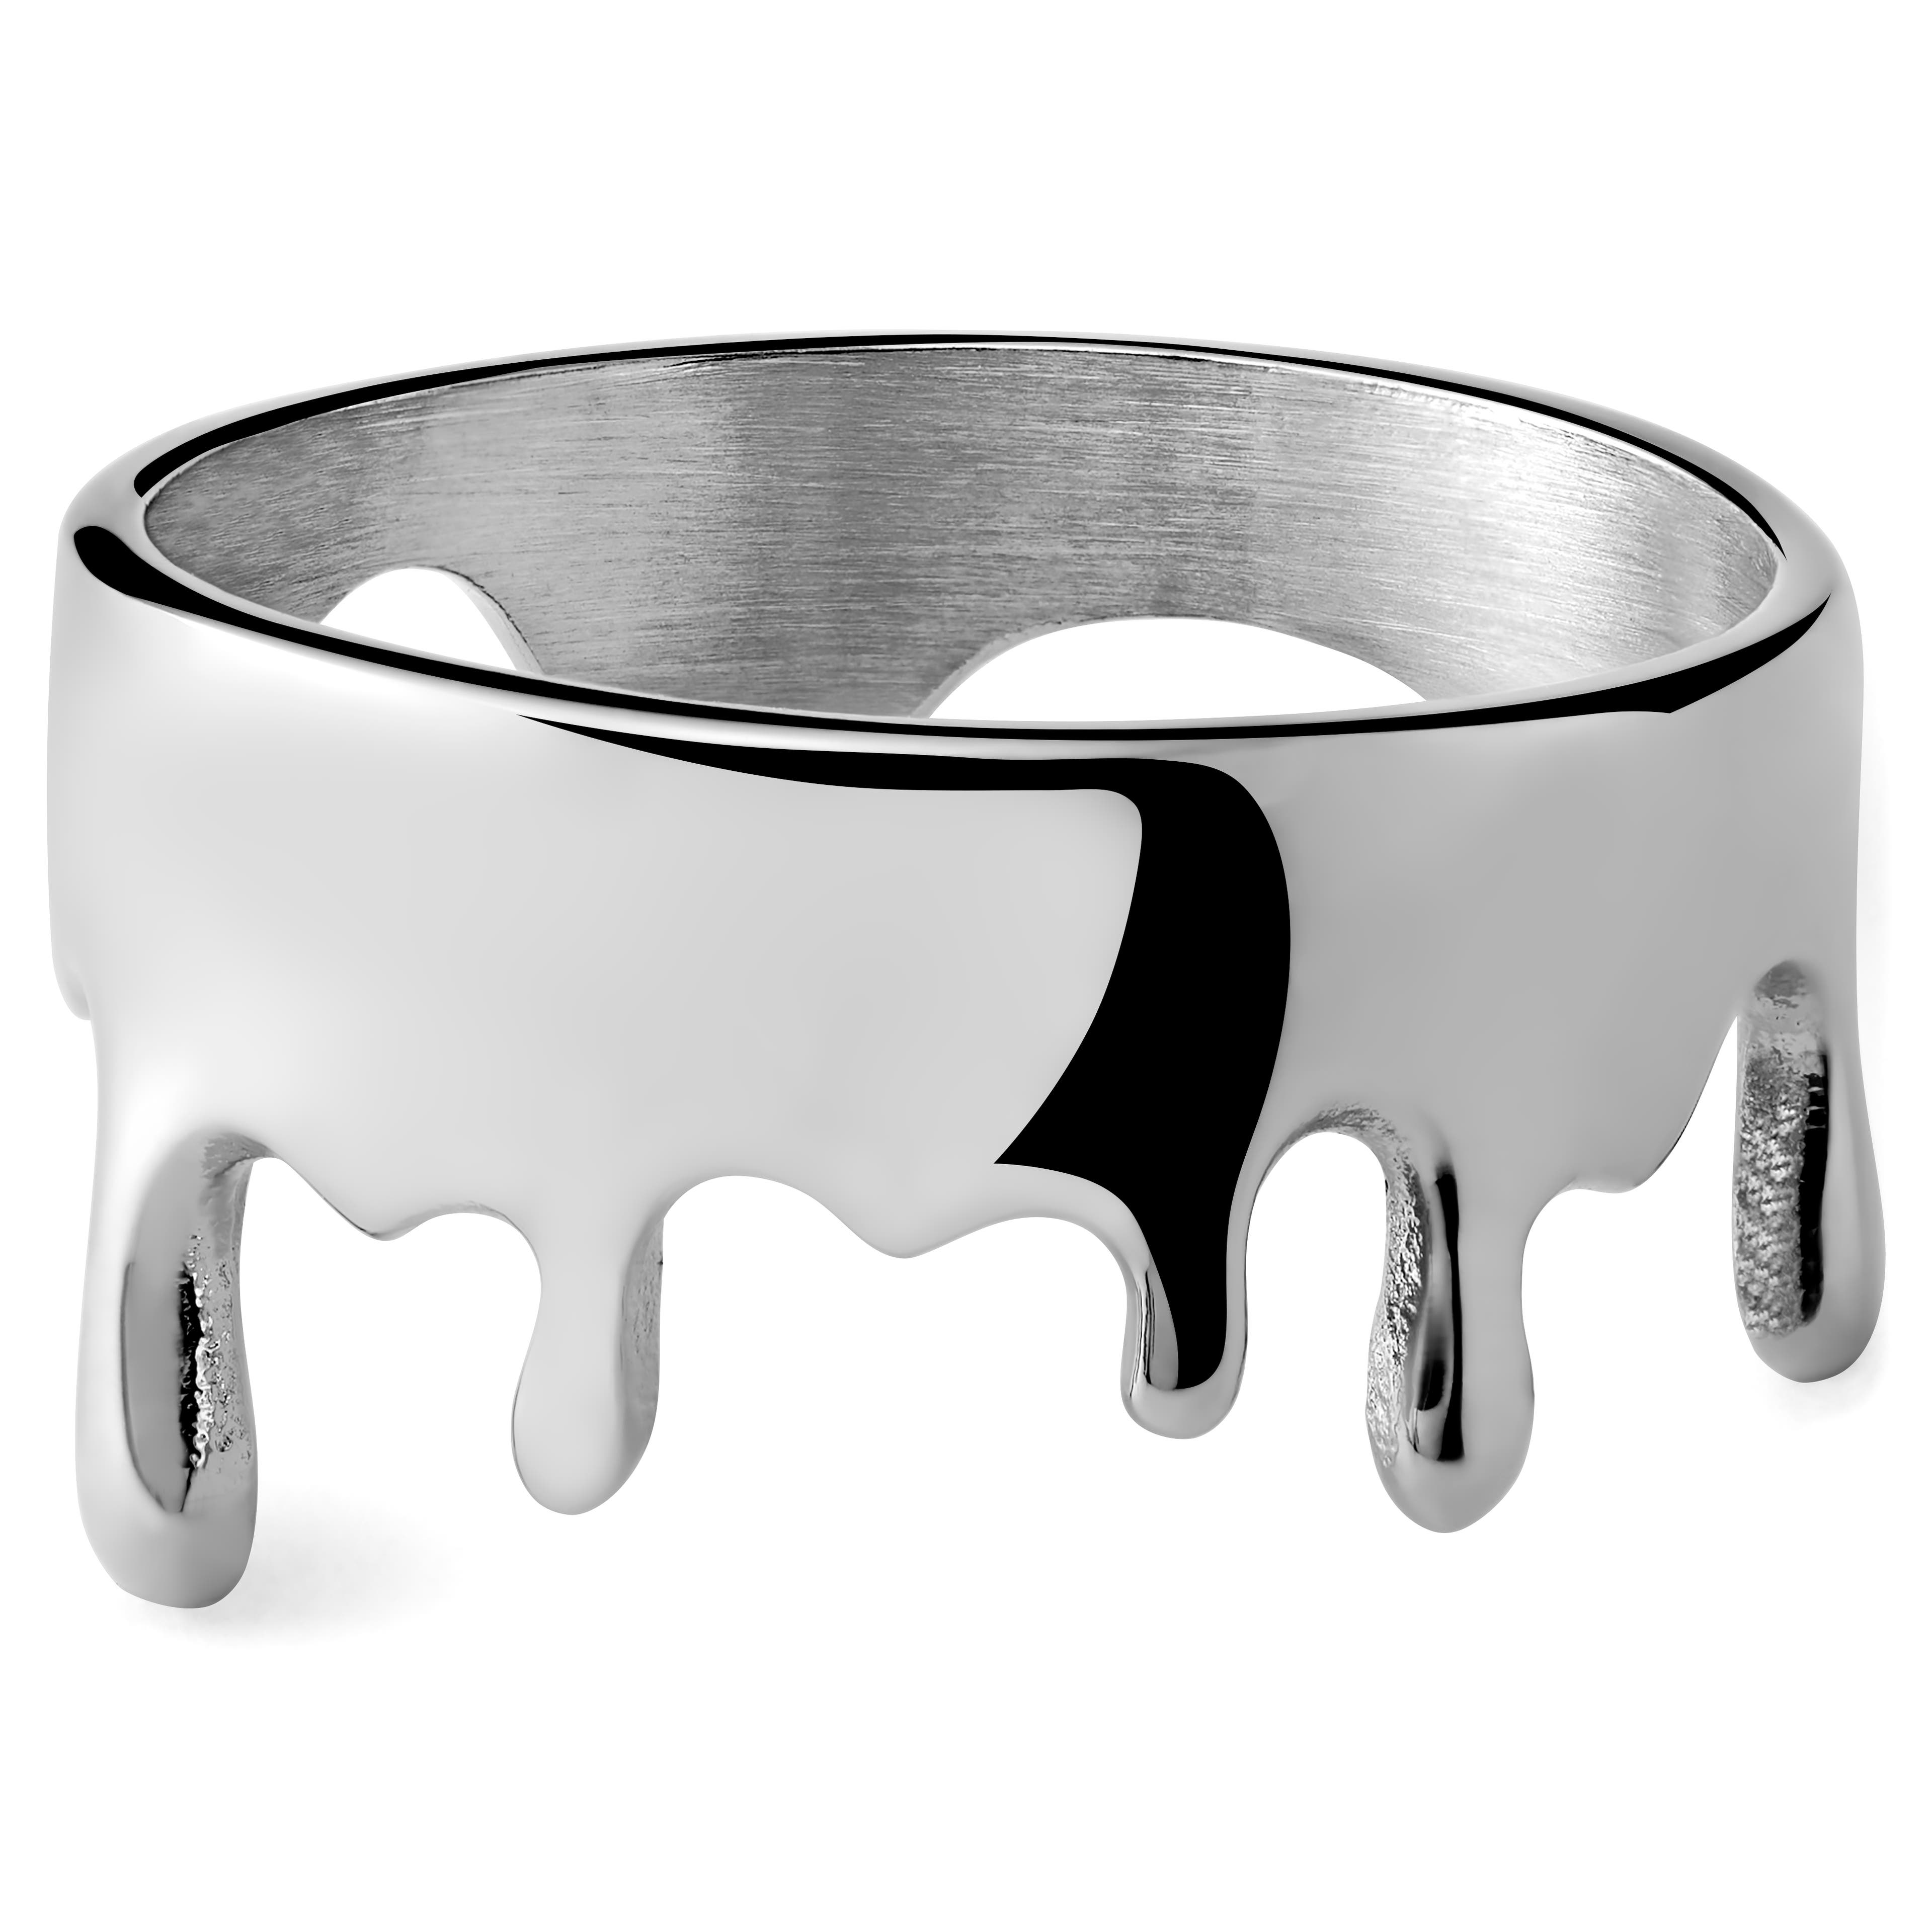 Fahrenheit | 12 mm Silver-Tone Stainless Steel Melting Ring